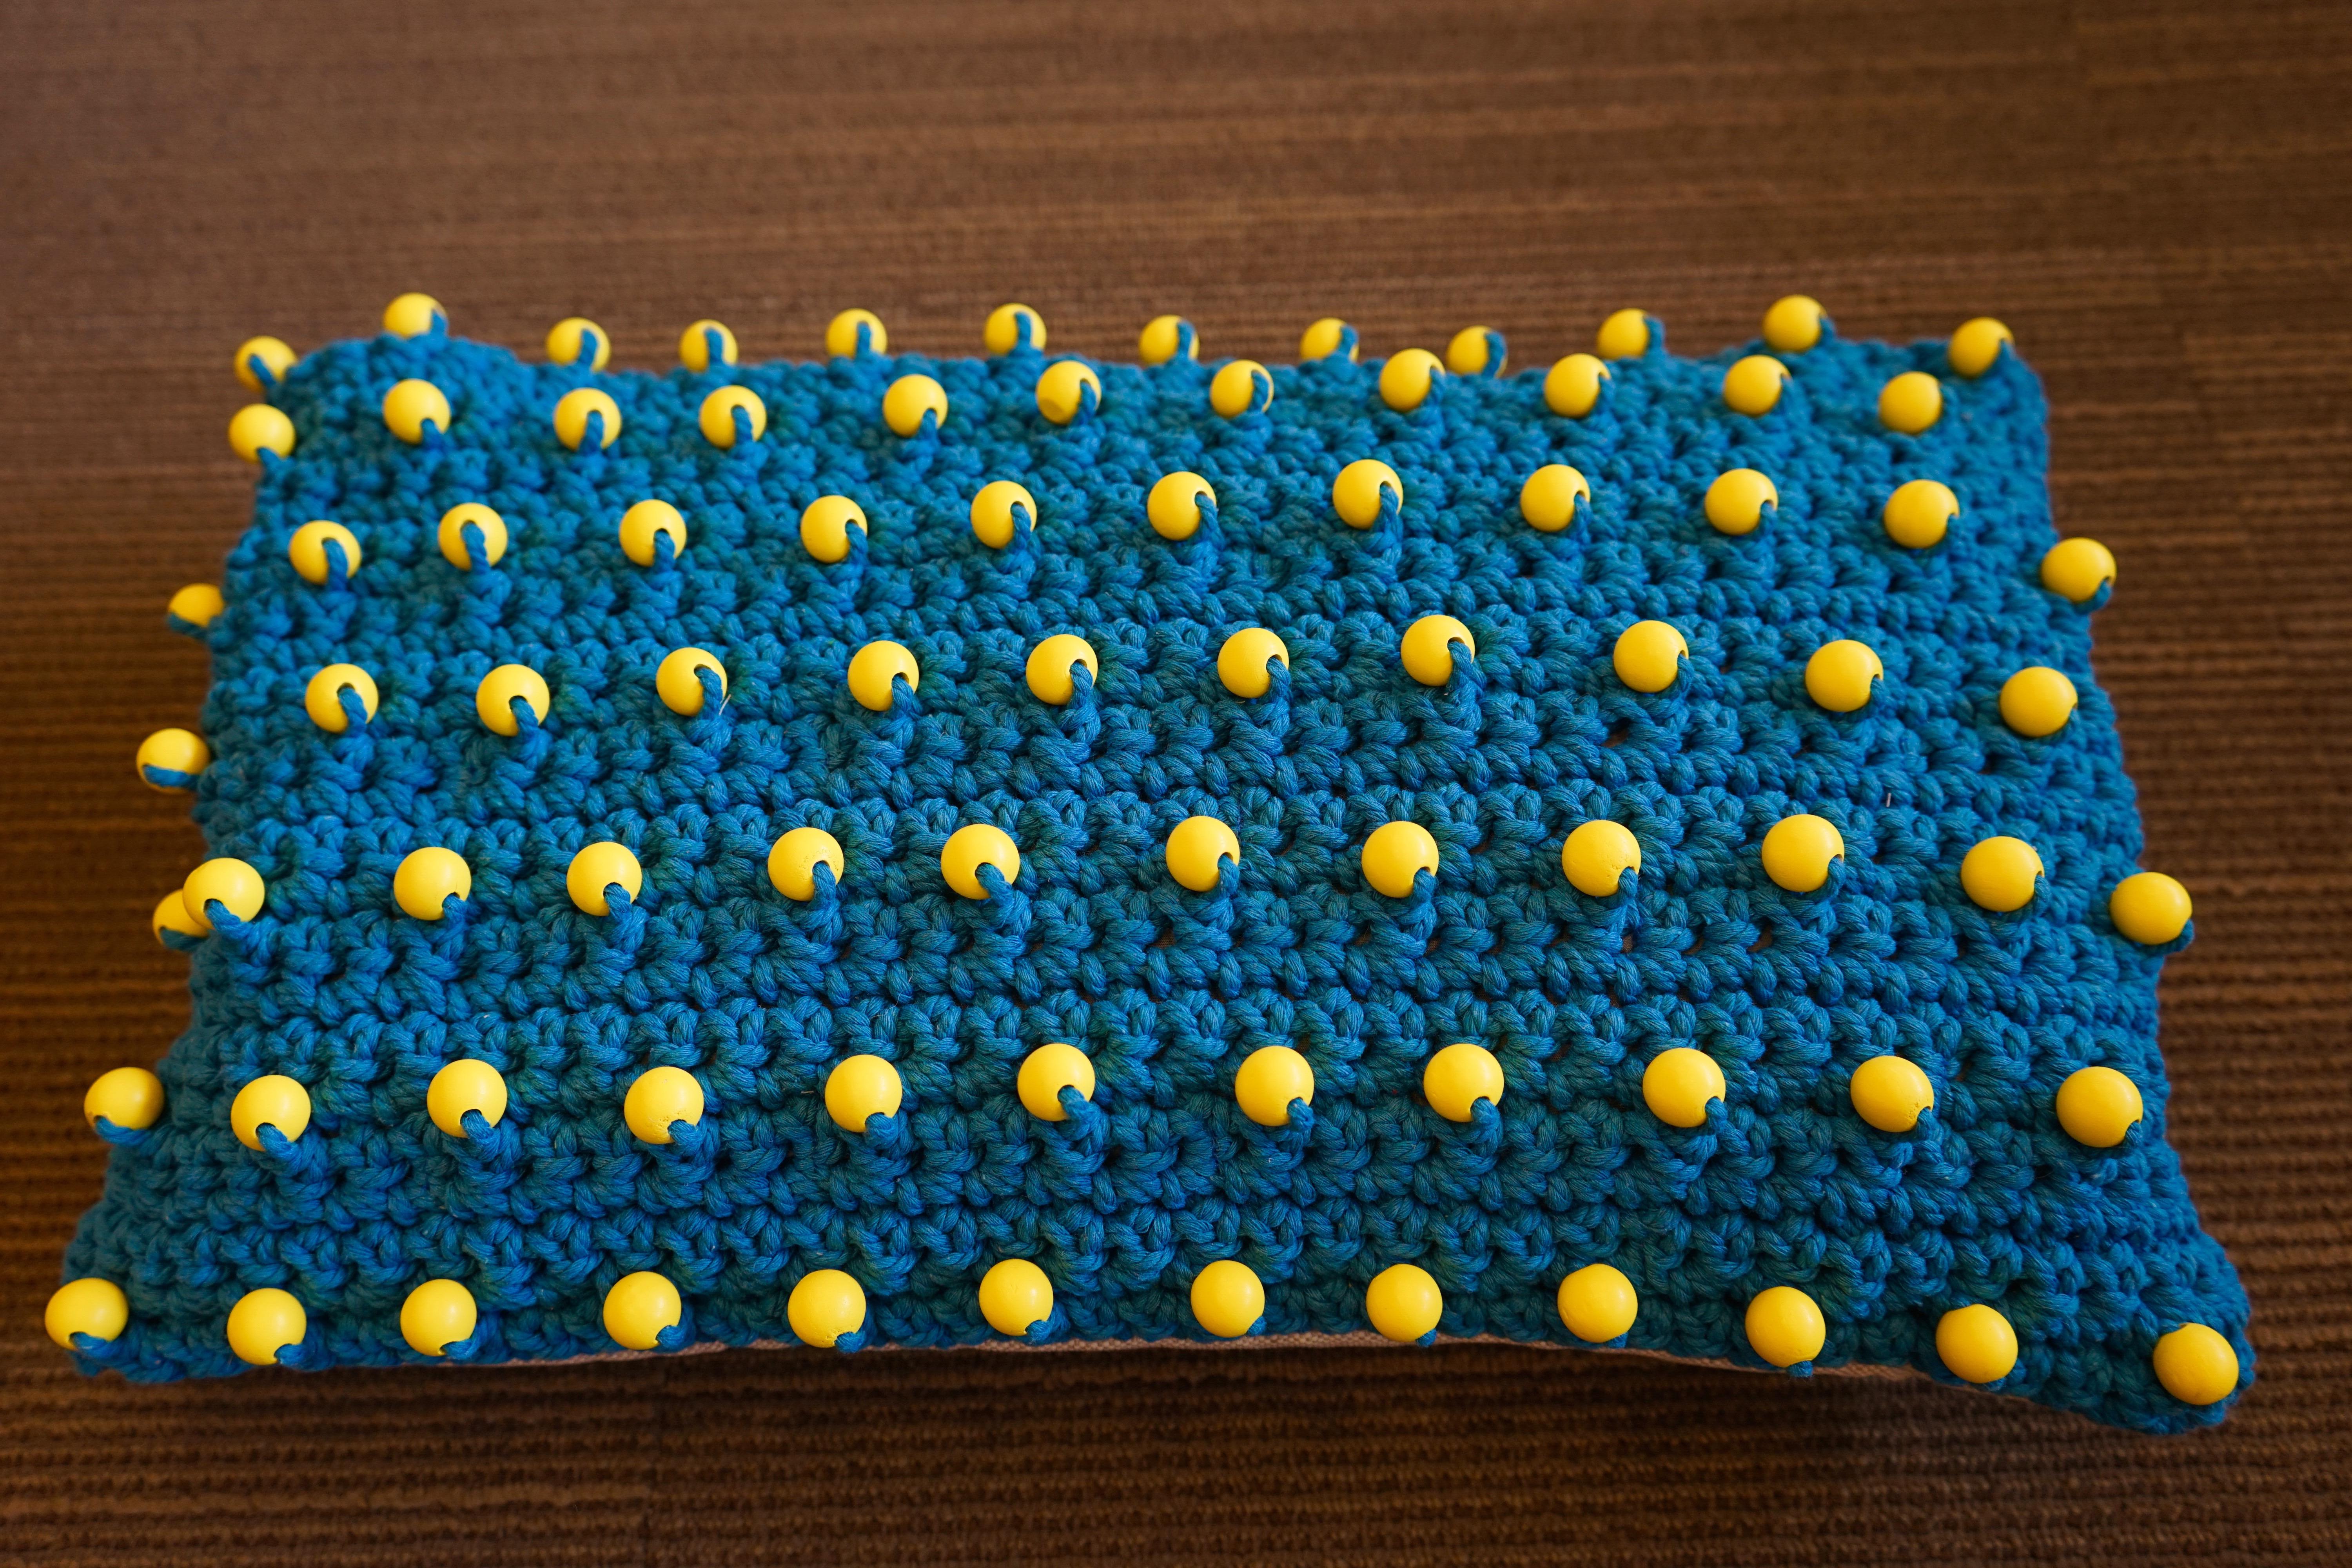 Contemporary woven blue pillow with bright yellow beads.